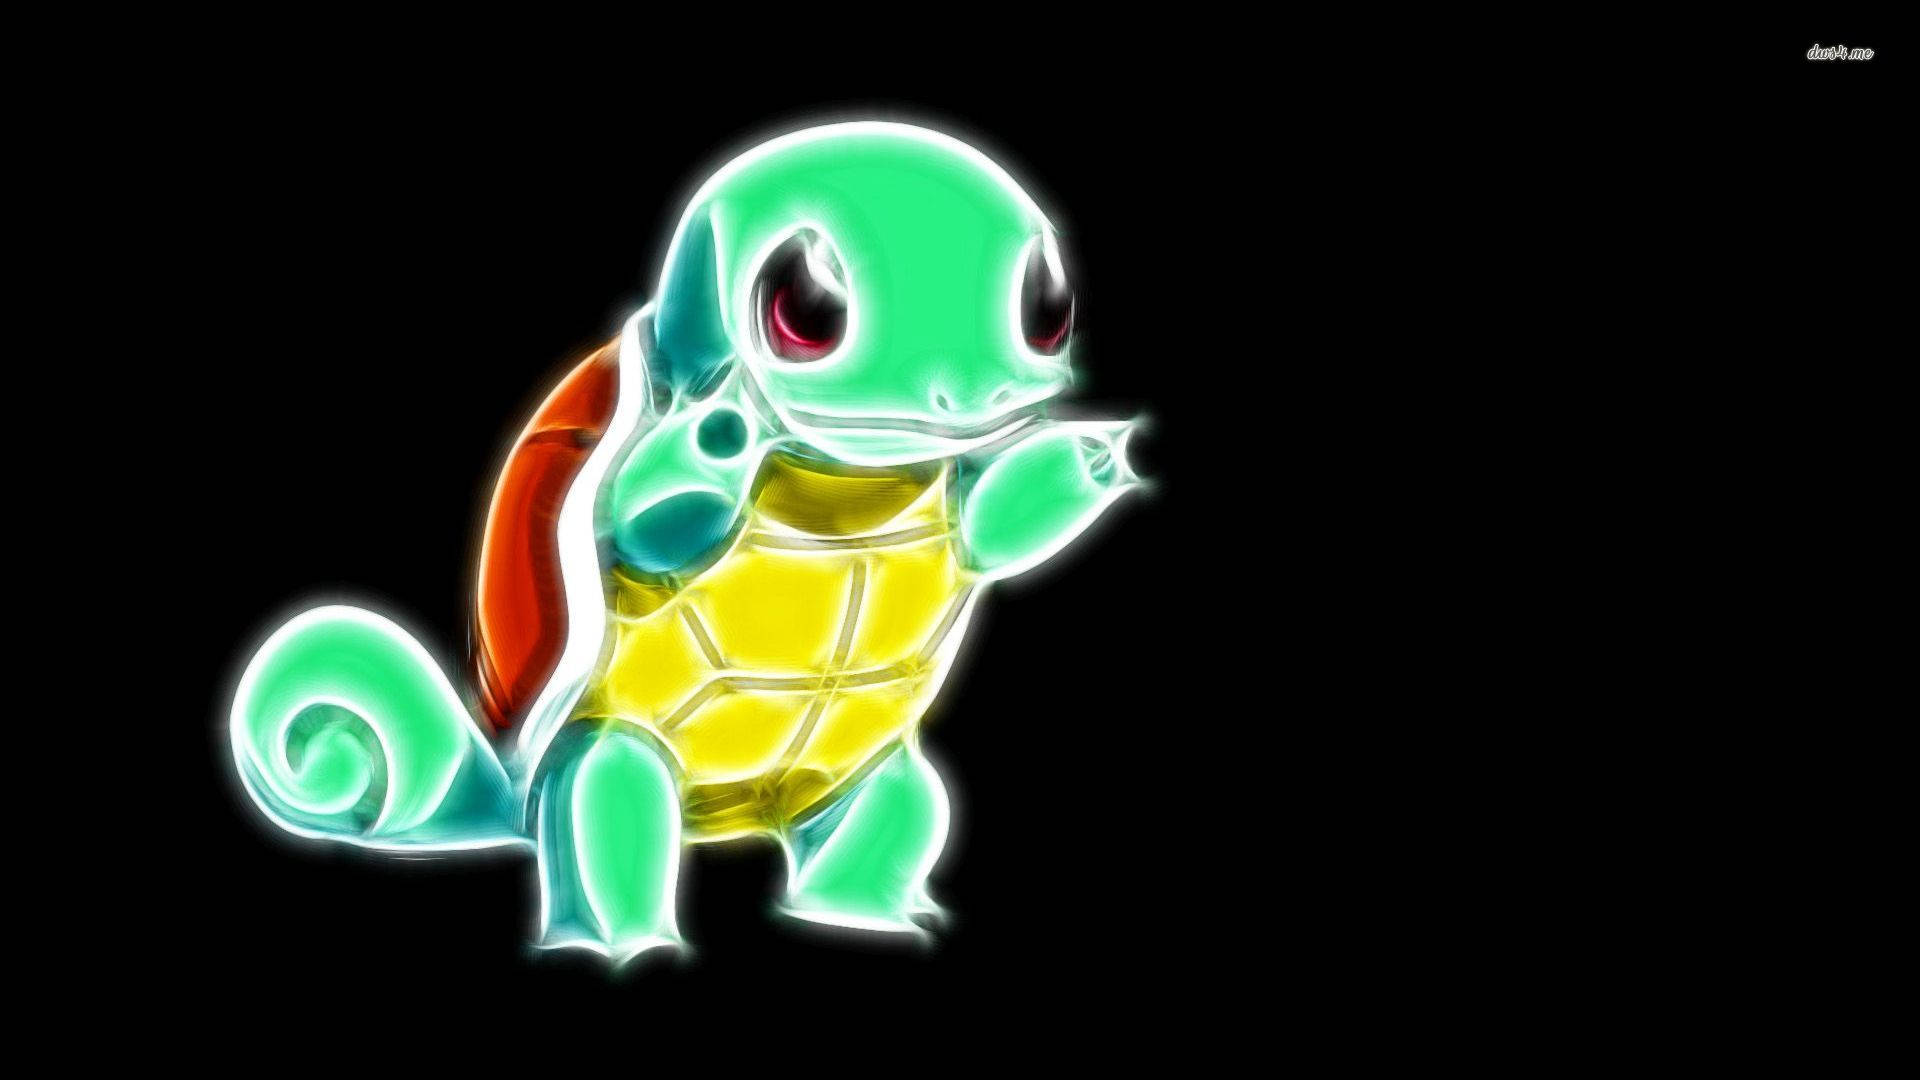 A Squirtle catches some morning rays Wallpaper